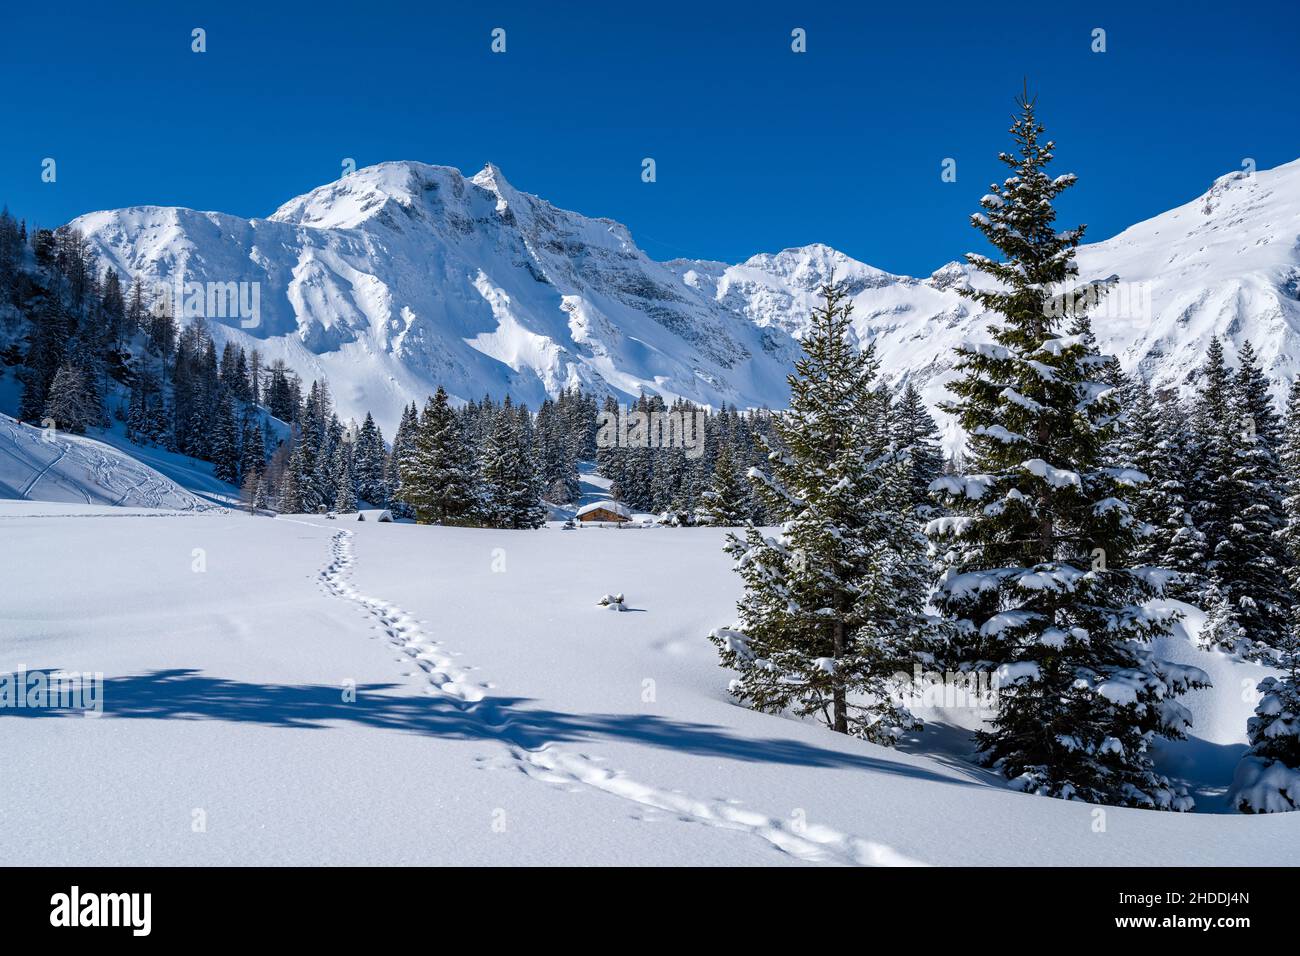 Trail of snowshoeers in snow-covered alpine landscape, Rauris, Salzburger Land, Austria Stock Photo